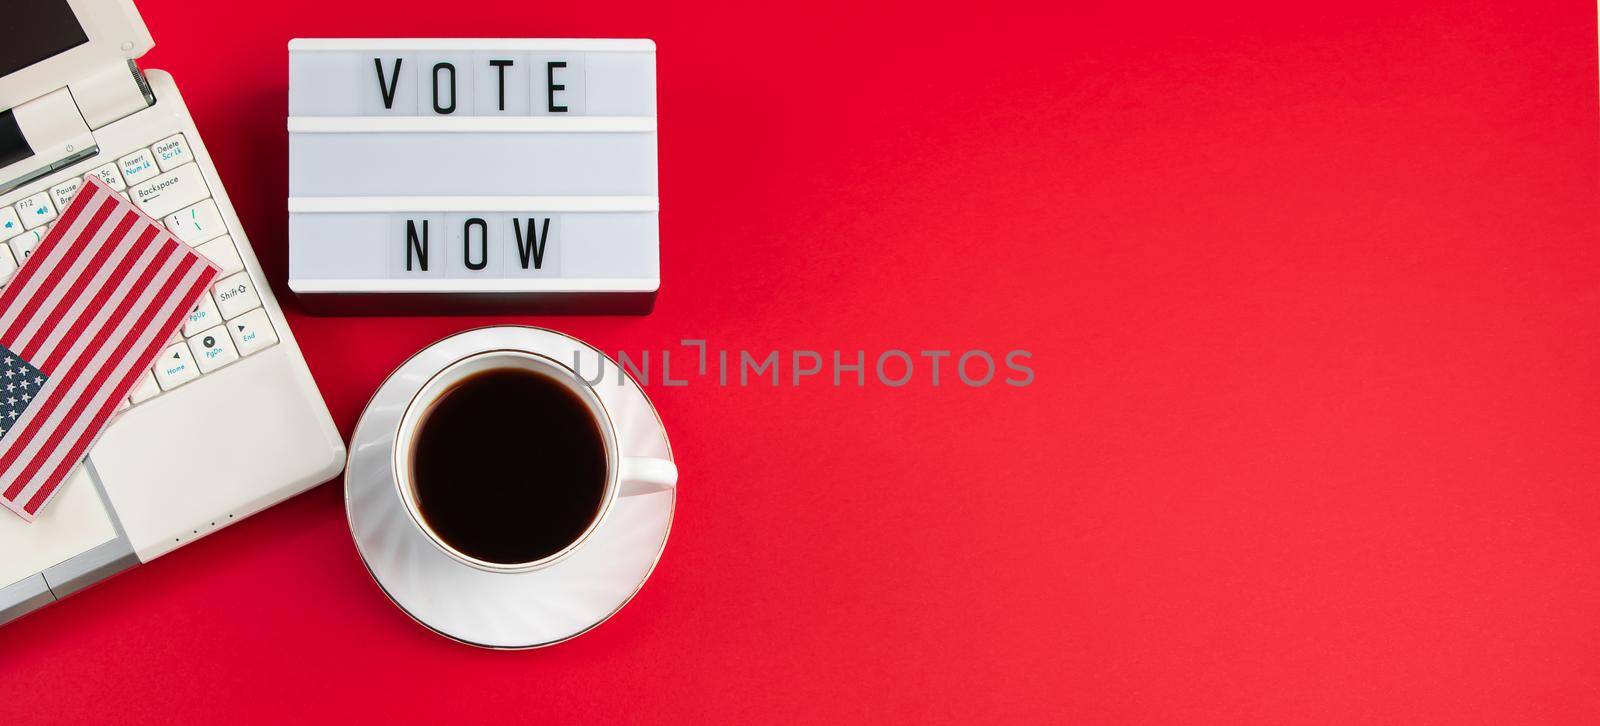 Online voting and elections concept. Laptop and coffee cup on red background. Place for text. by Statuska